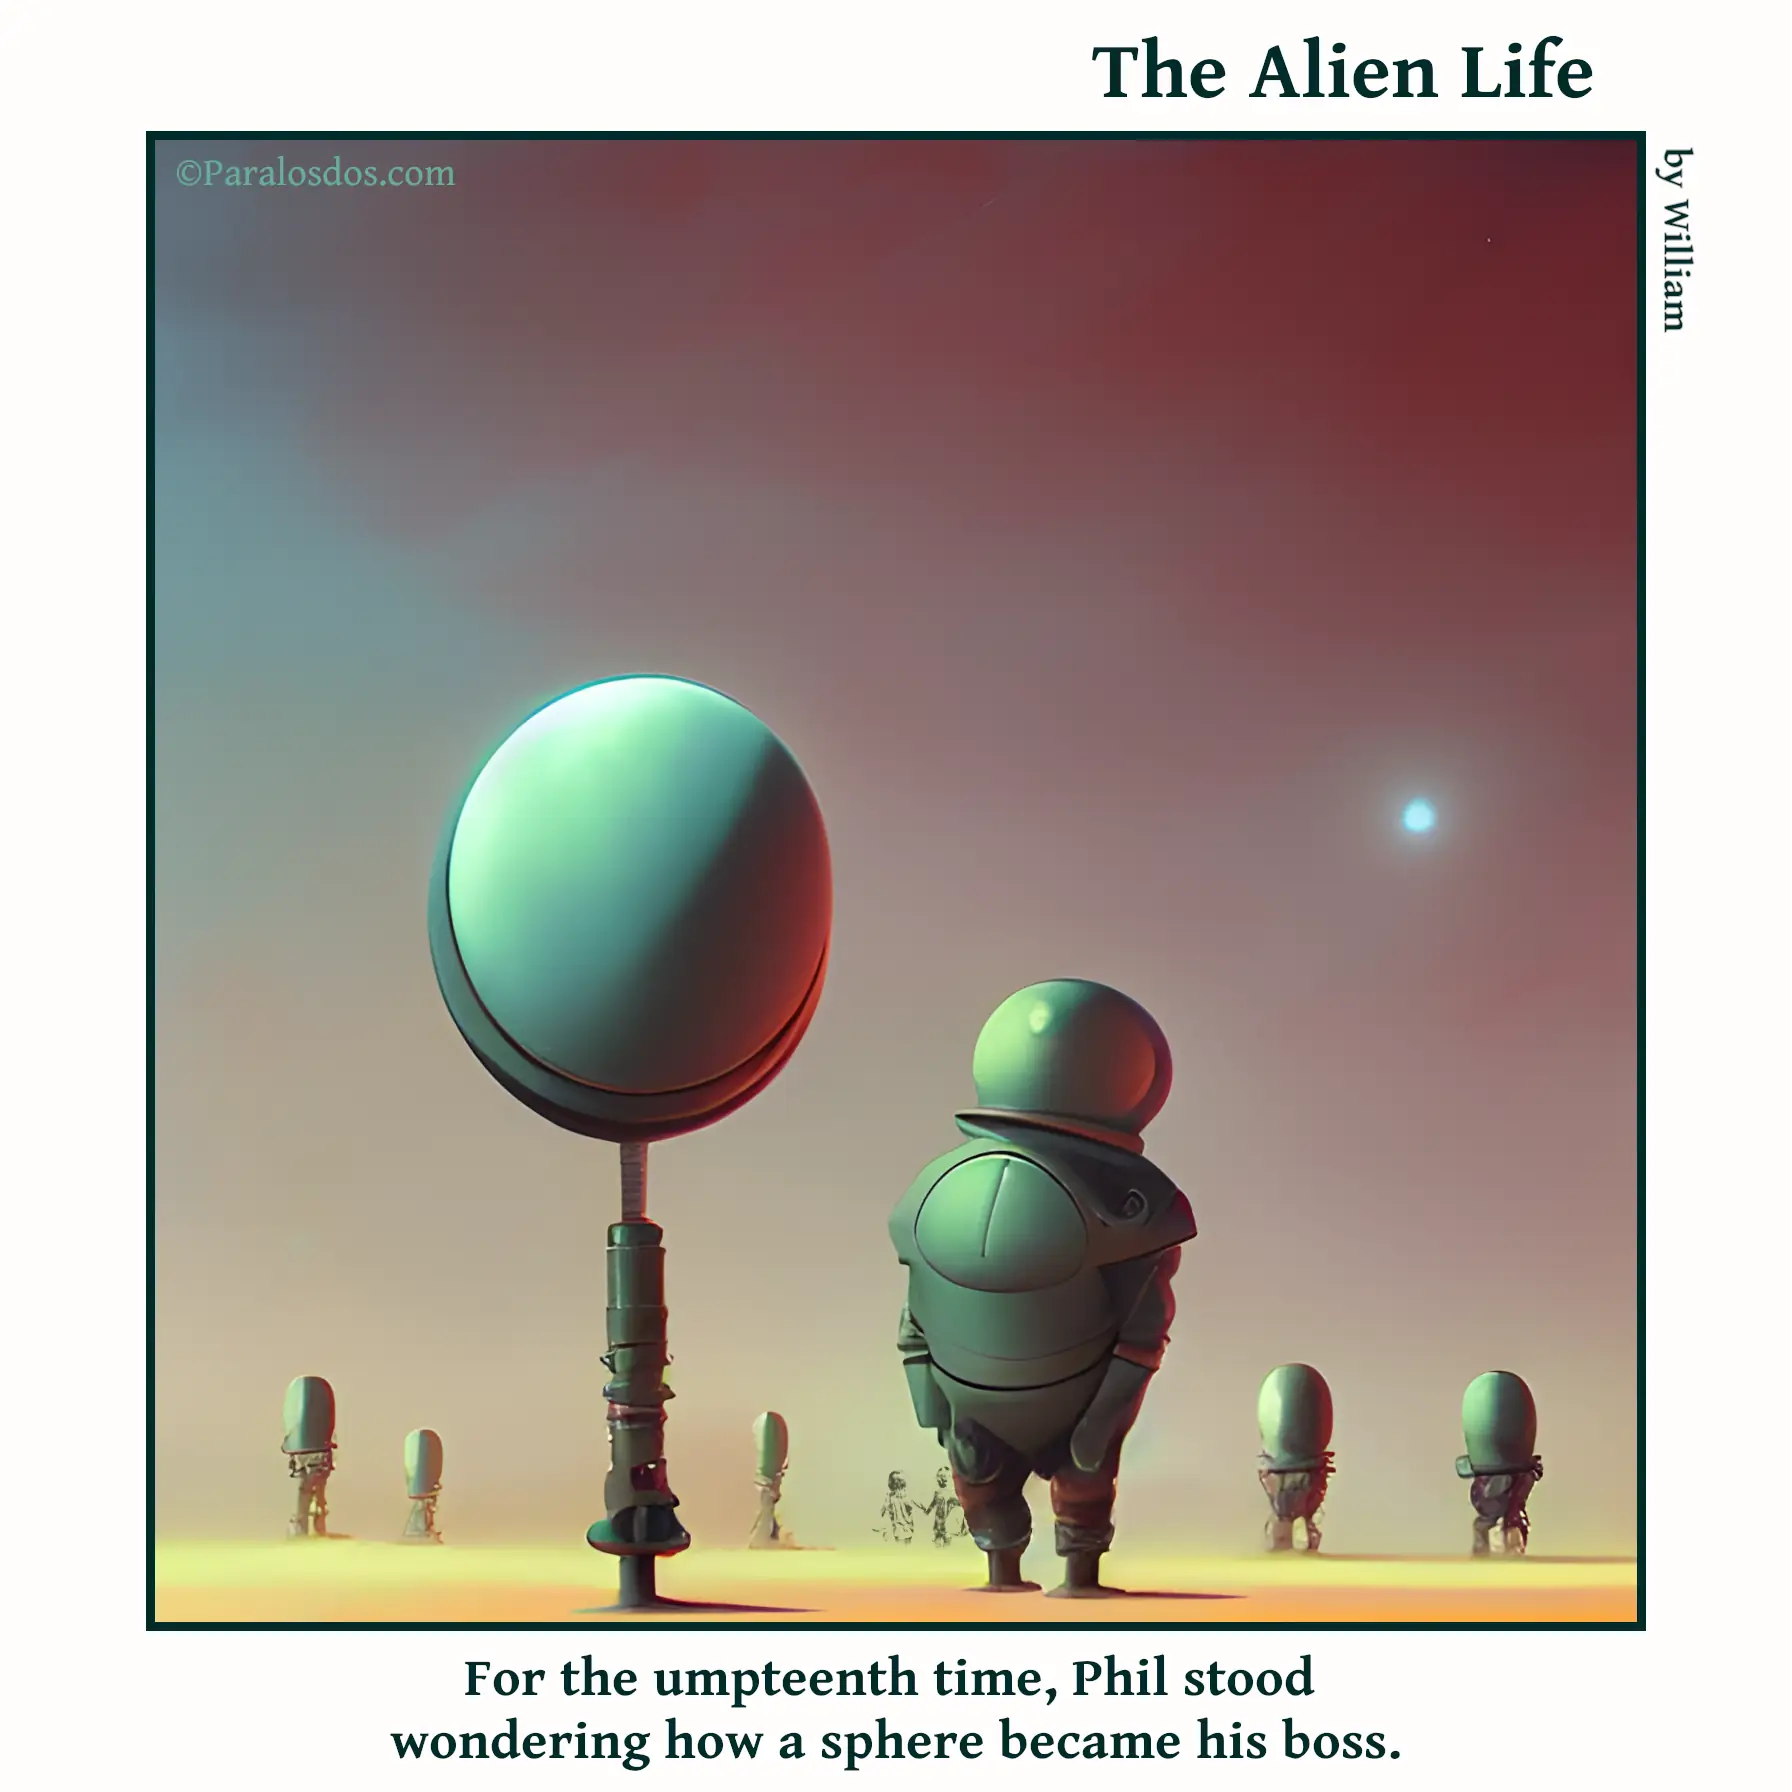 The Alien Life, one panel Comic. An being wearing an astronaut uniform is standing before a round object mounted on a pole. The caption reads: For the umpteenth time, Phil stood wondering how a sphere became his boss.